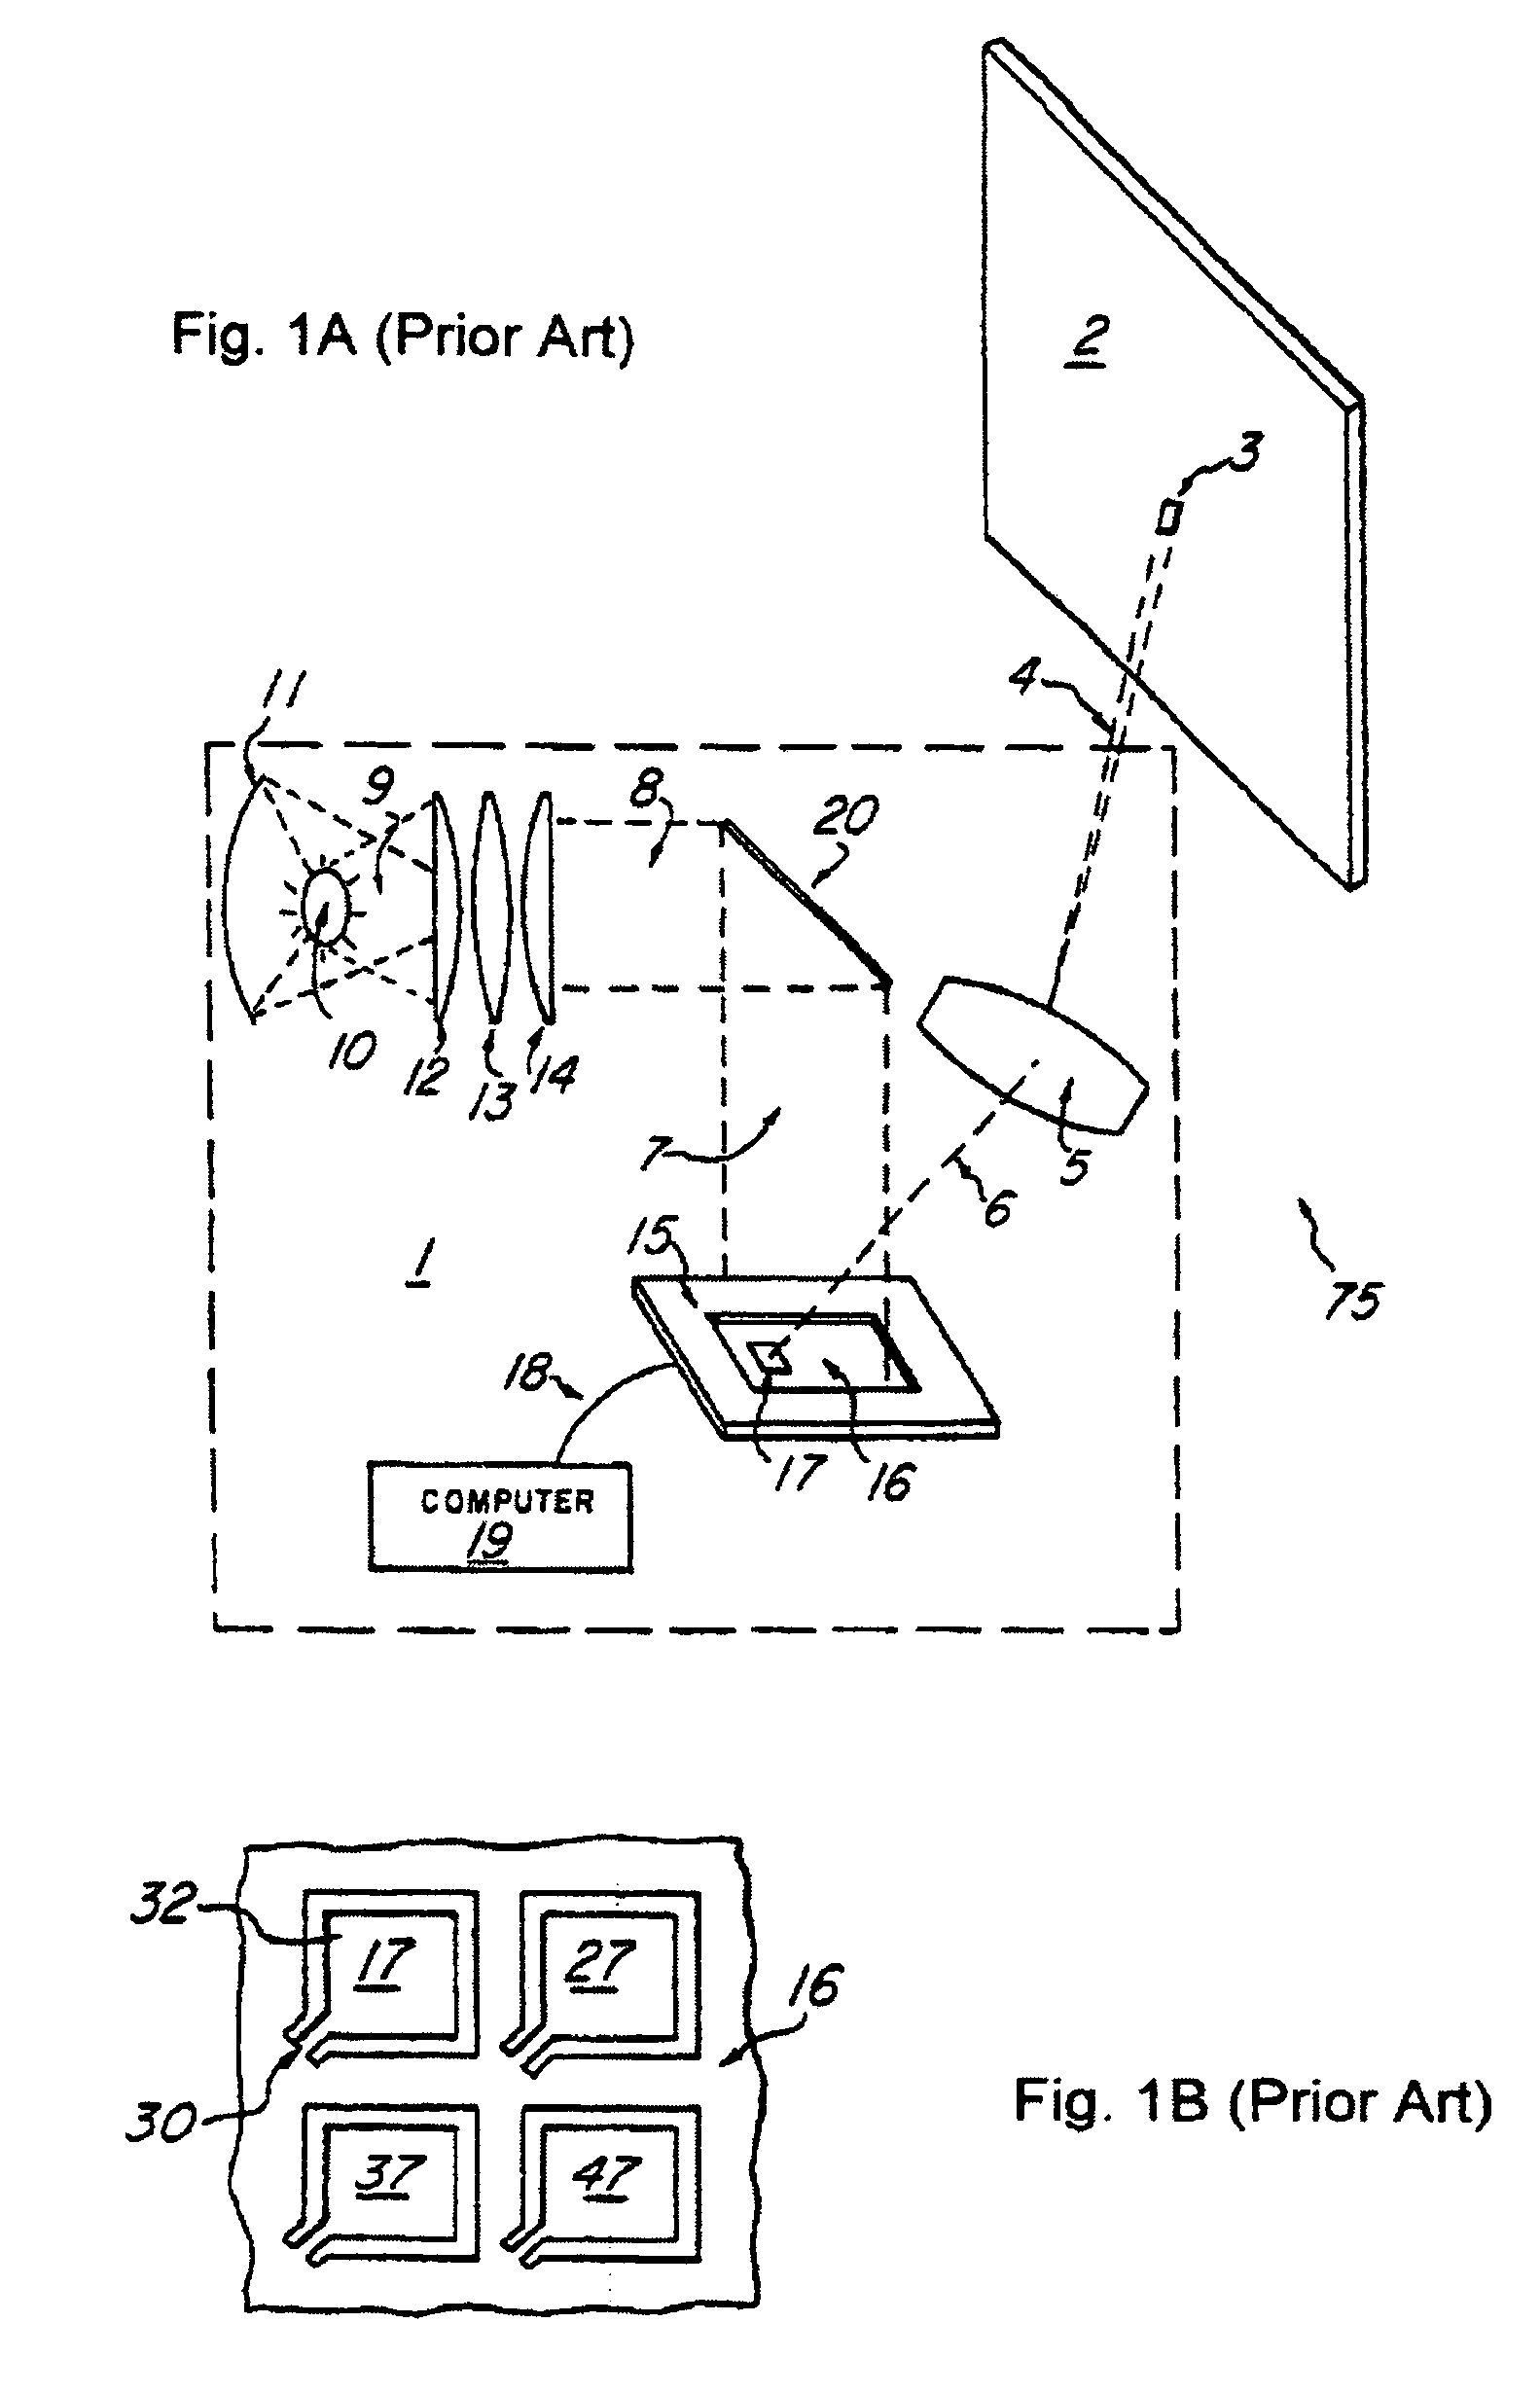 Analog micromirror devices with continuous intermediate states